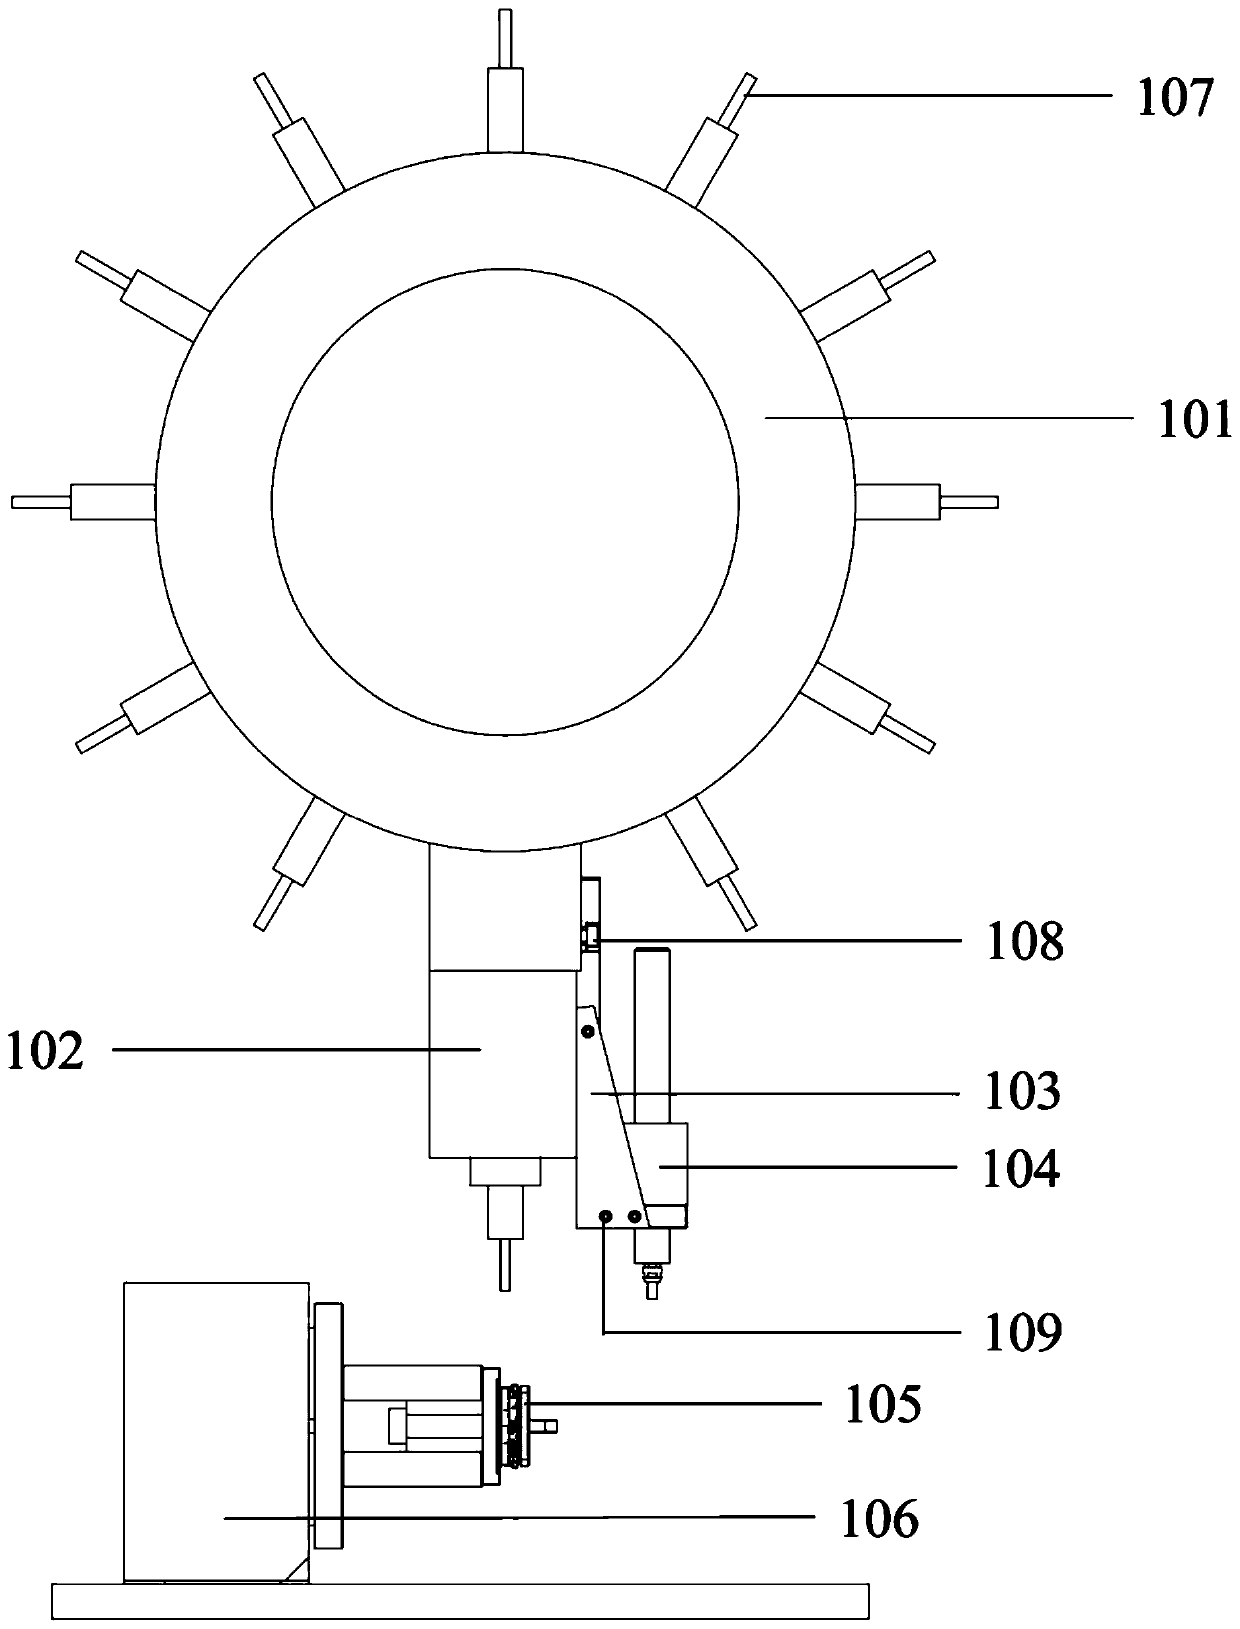 Common metal CNC machine additionally provided with high-speed spindle and application method thereof